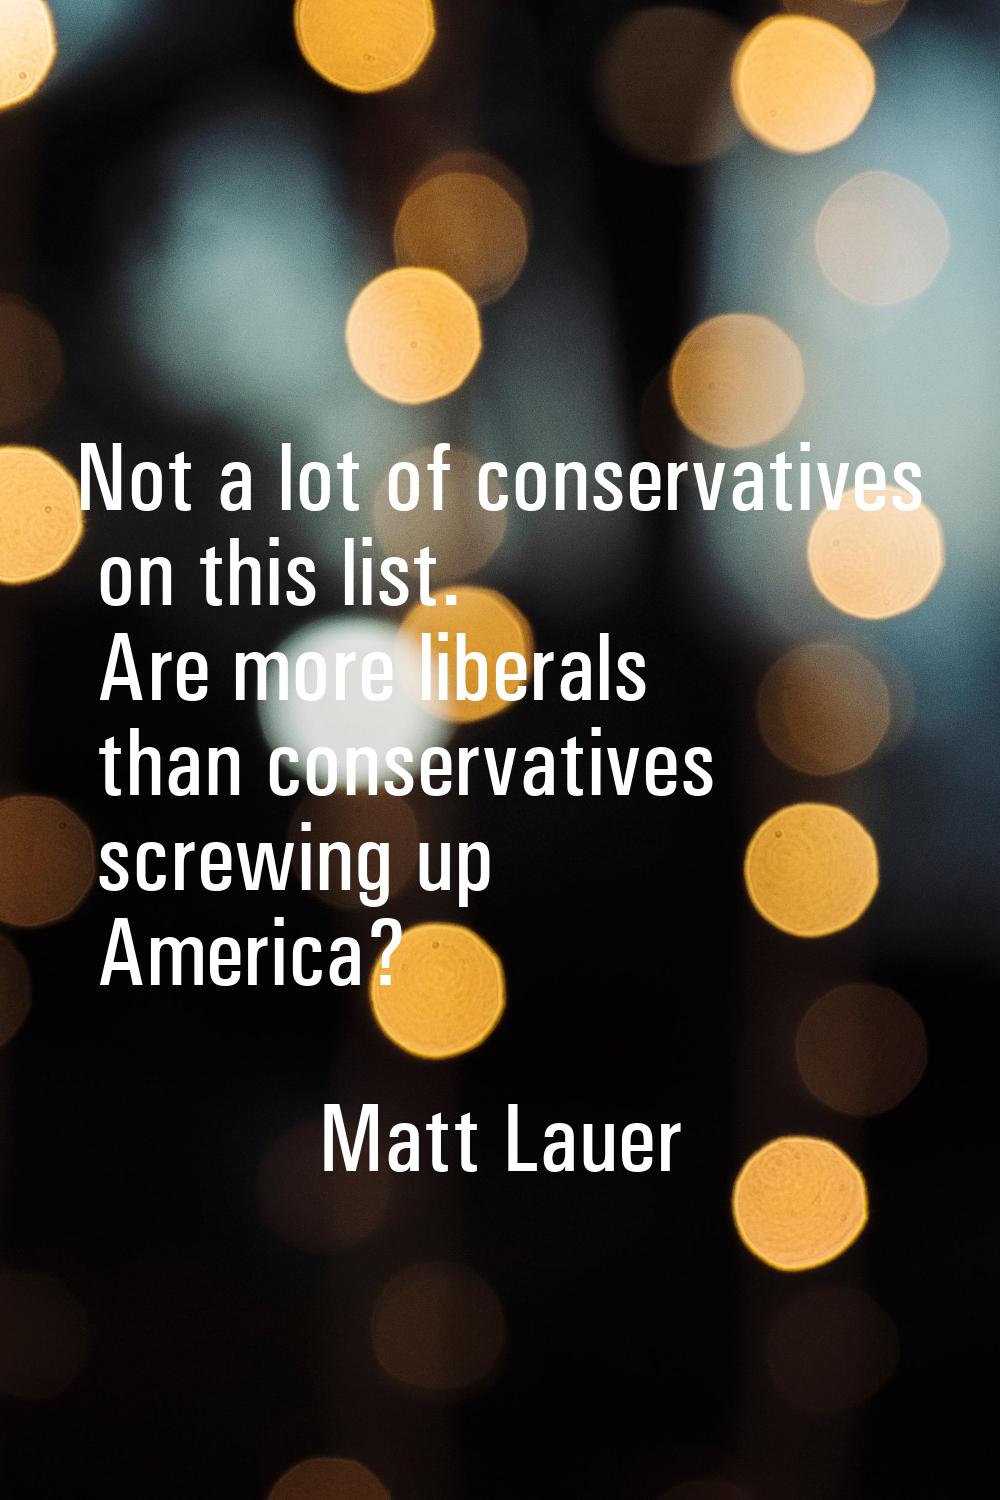 Not a lot of conservatives on this list. Are more liberals than conservatives screwing up America?